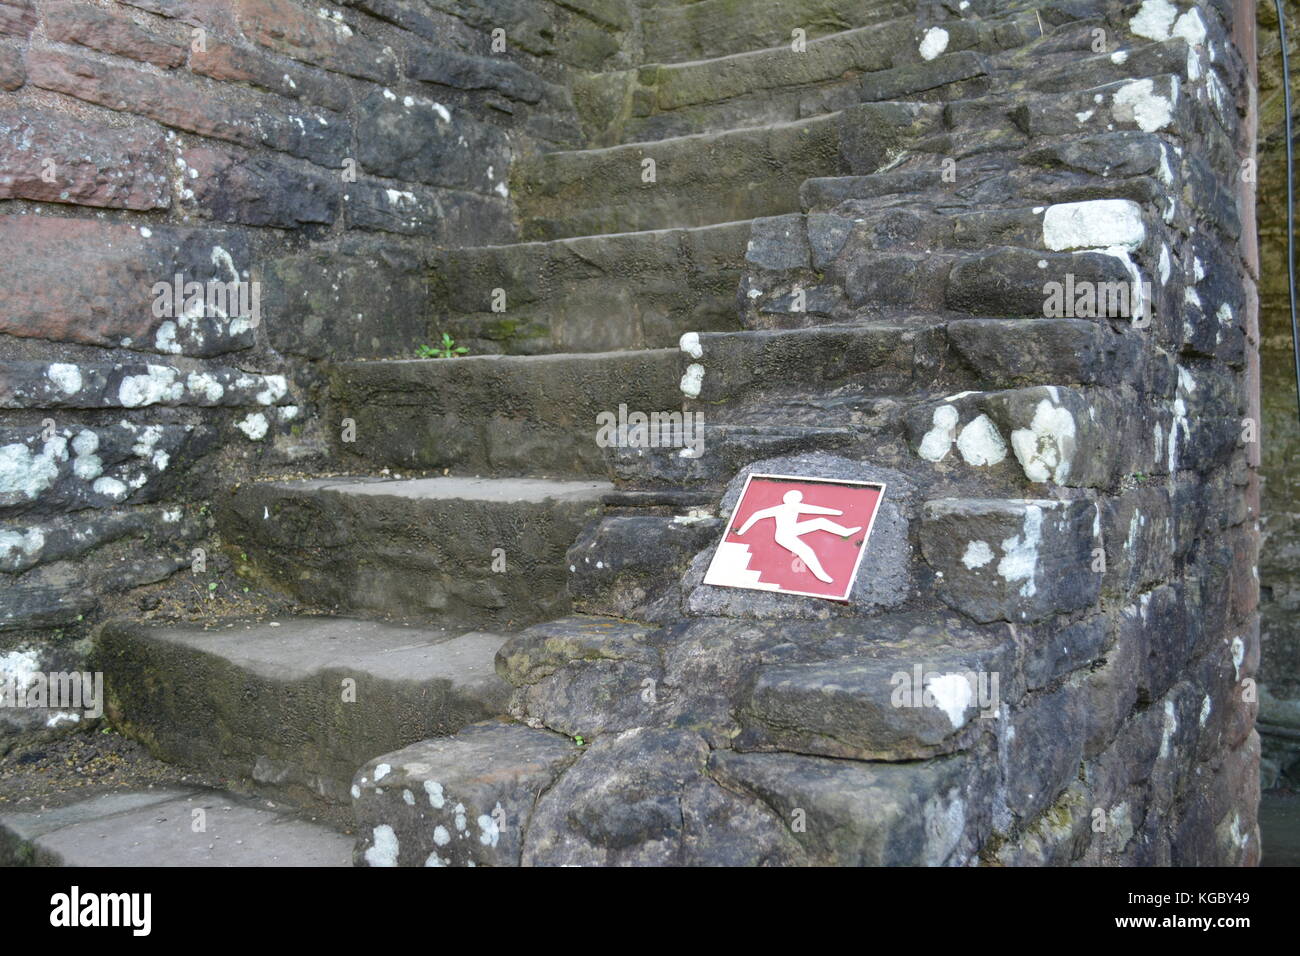 Step stair detail at Tintern Abbey Monmouthshire with red and white square metal danger of falling sign re health and safety hazards ancient structure Stock Photo